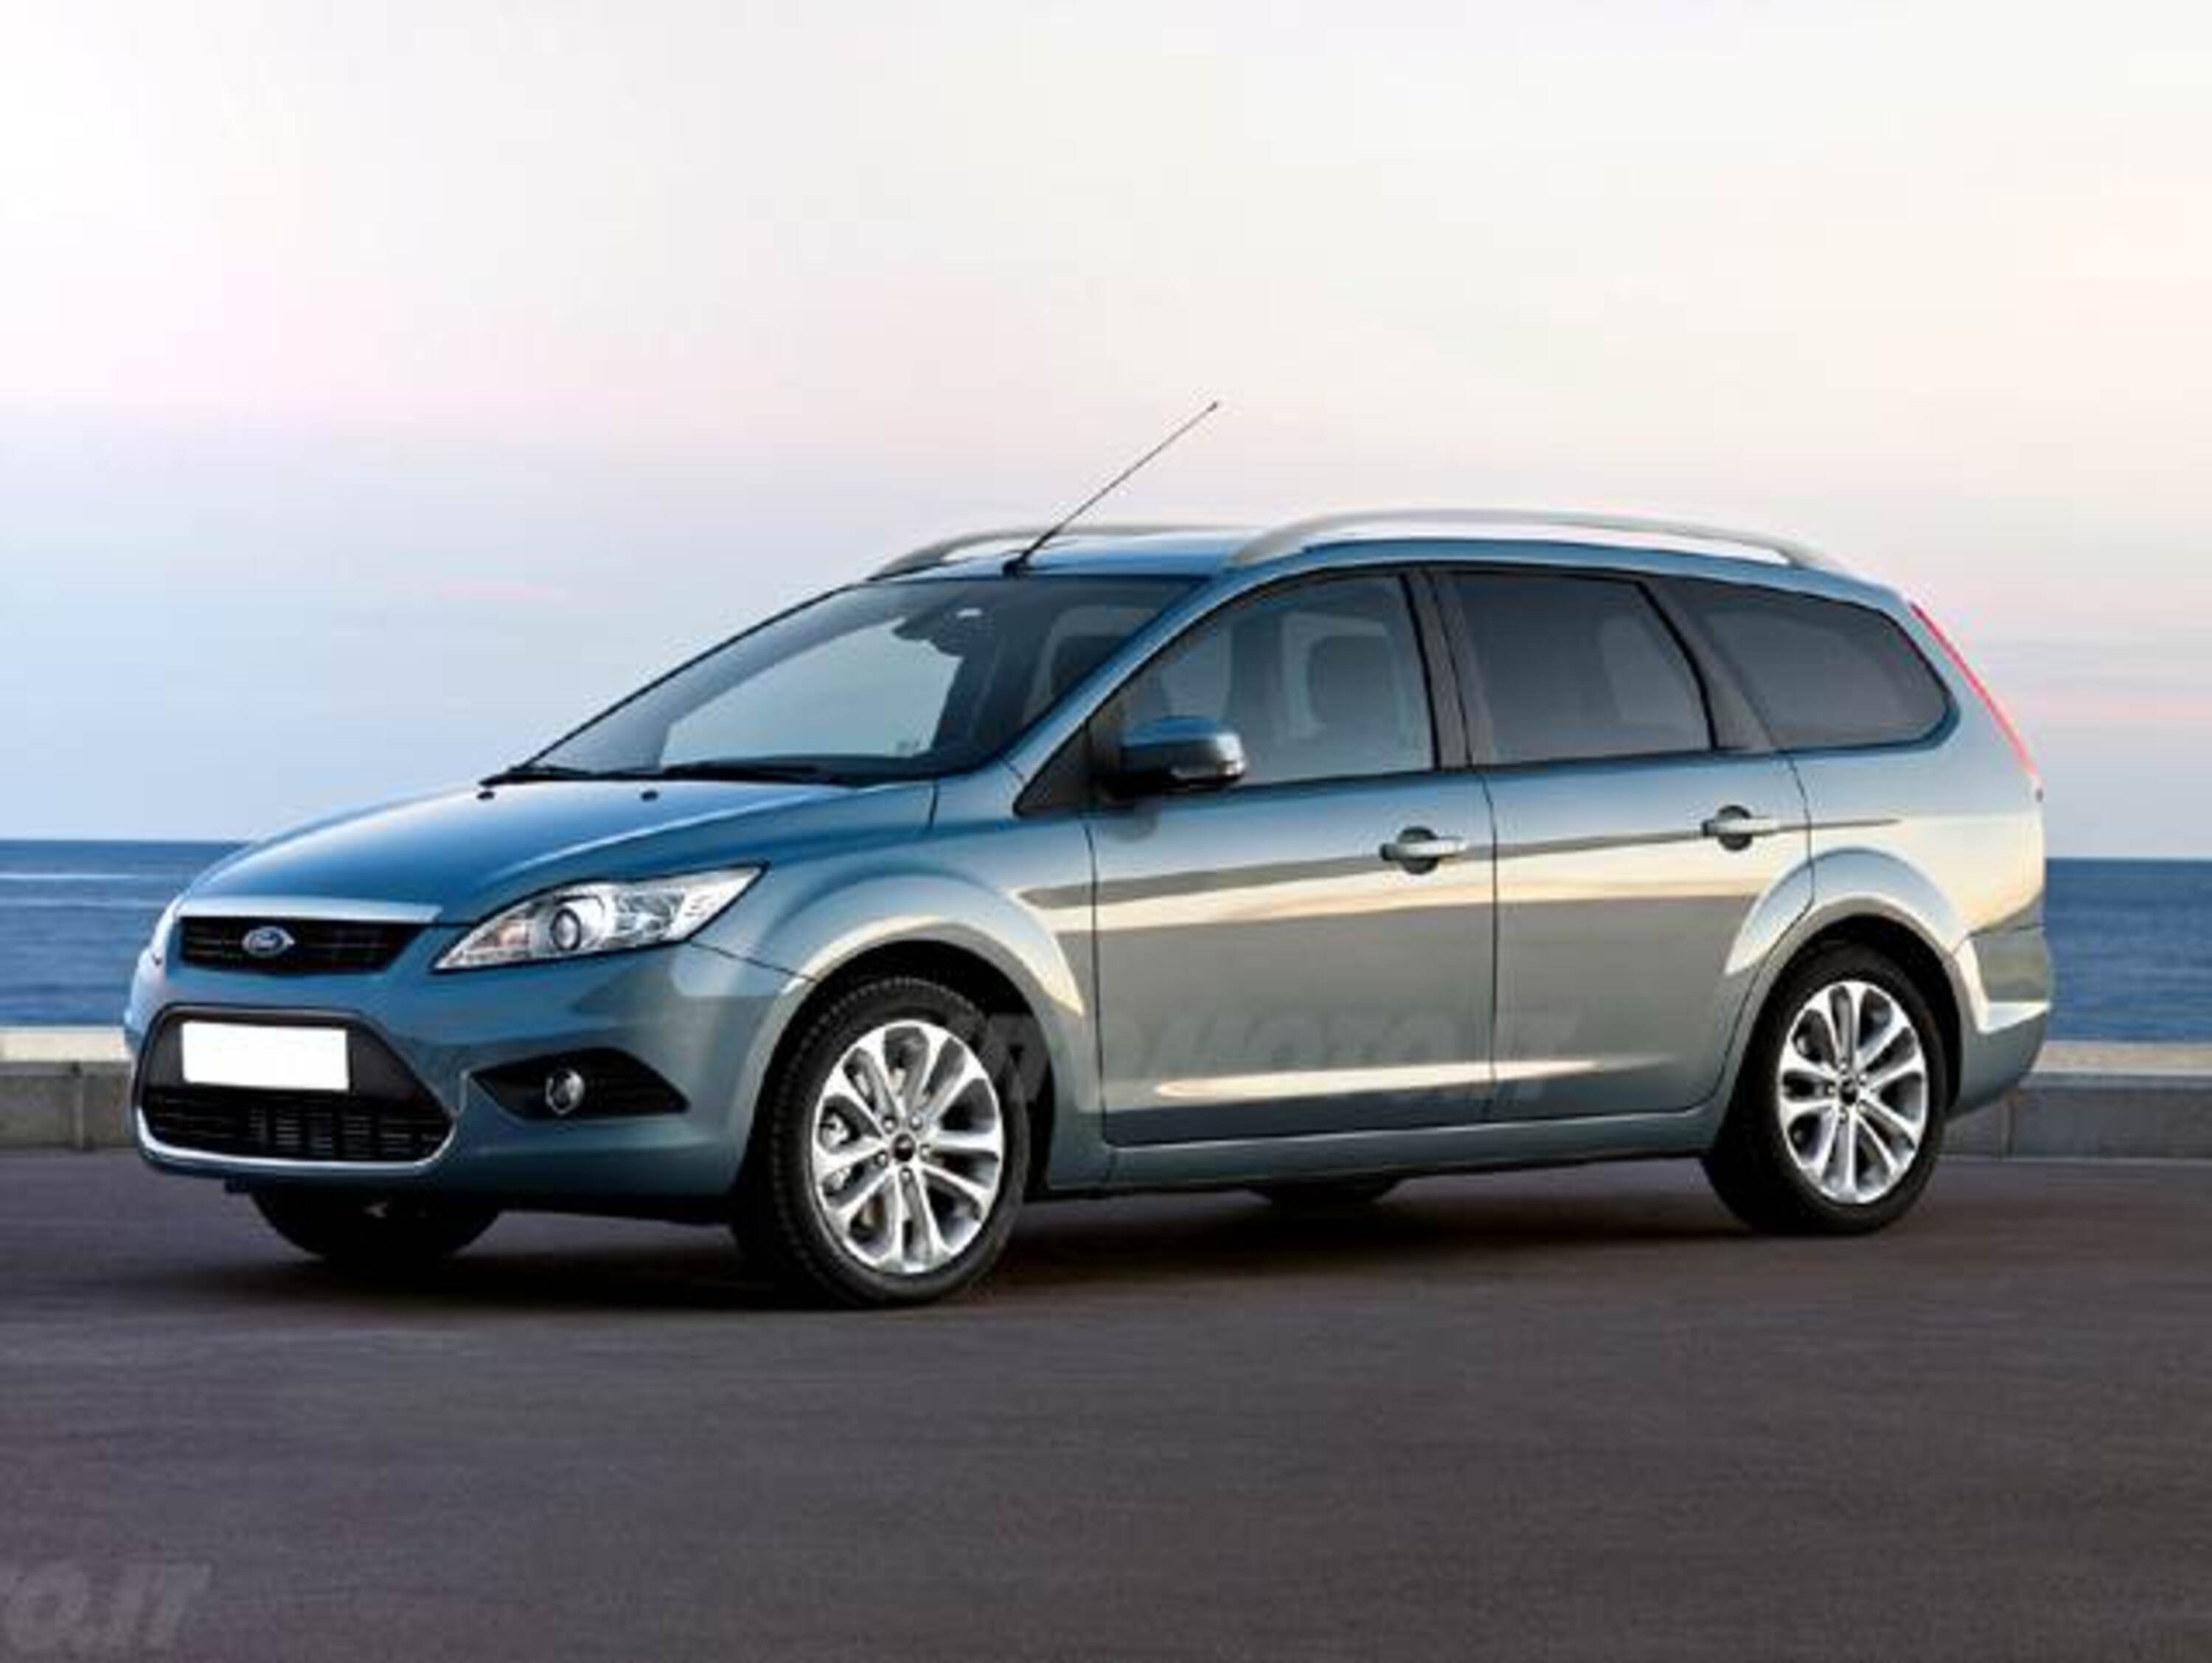 Ford Focus Station Wagon 1.6 Ti-VCT (115CV) SW